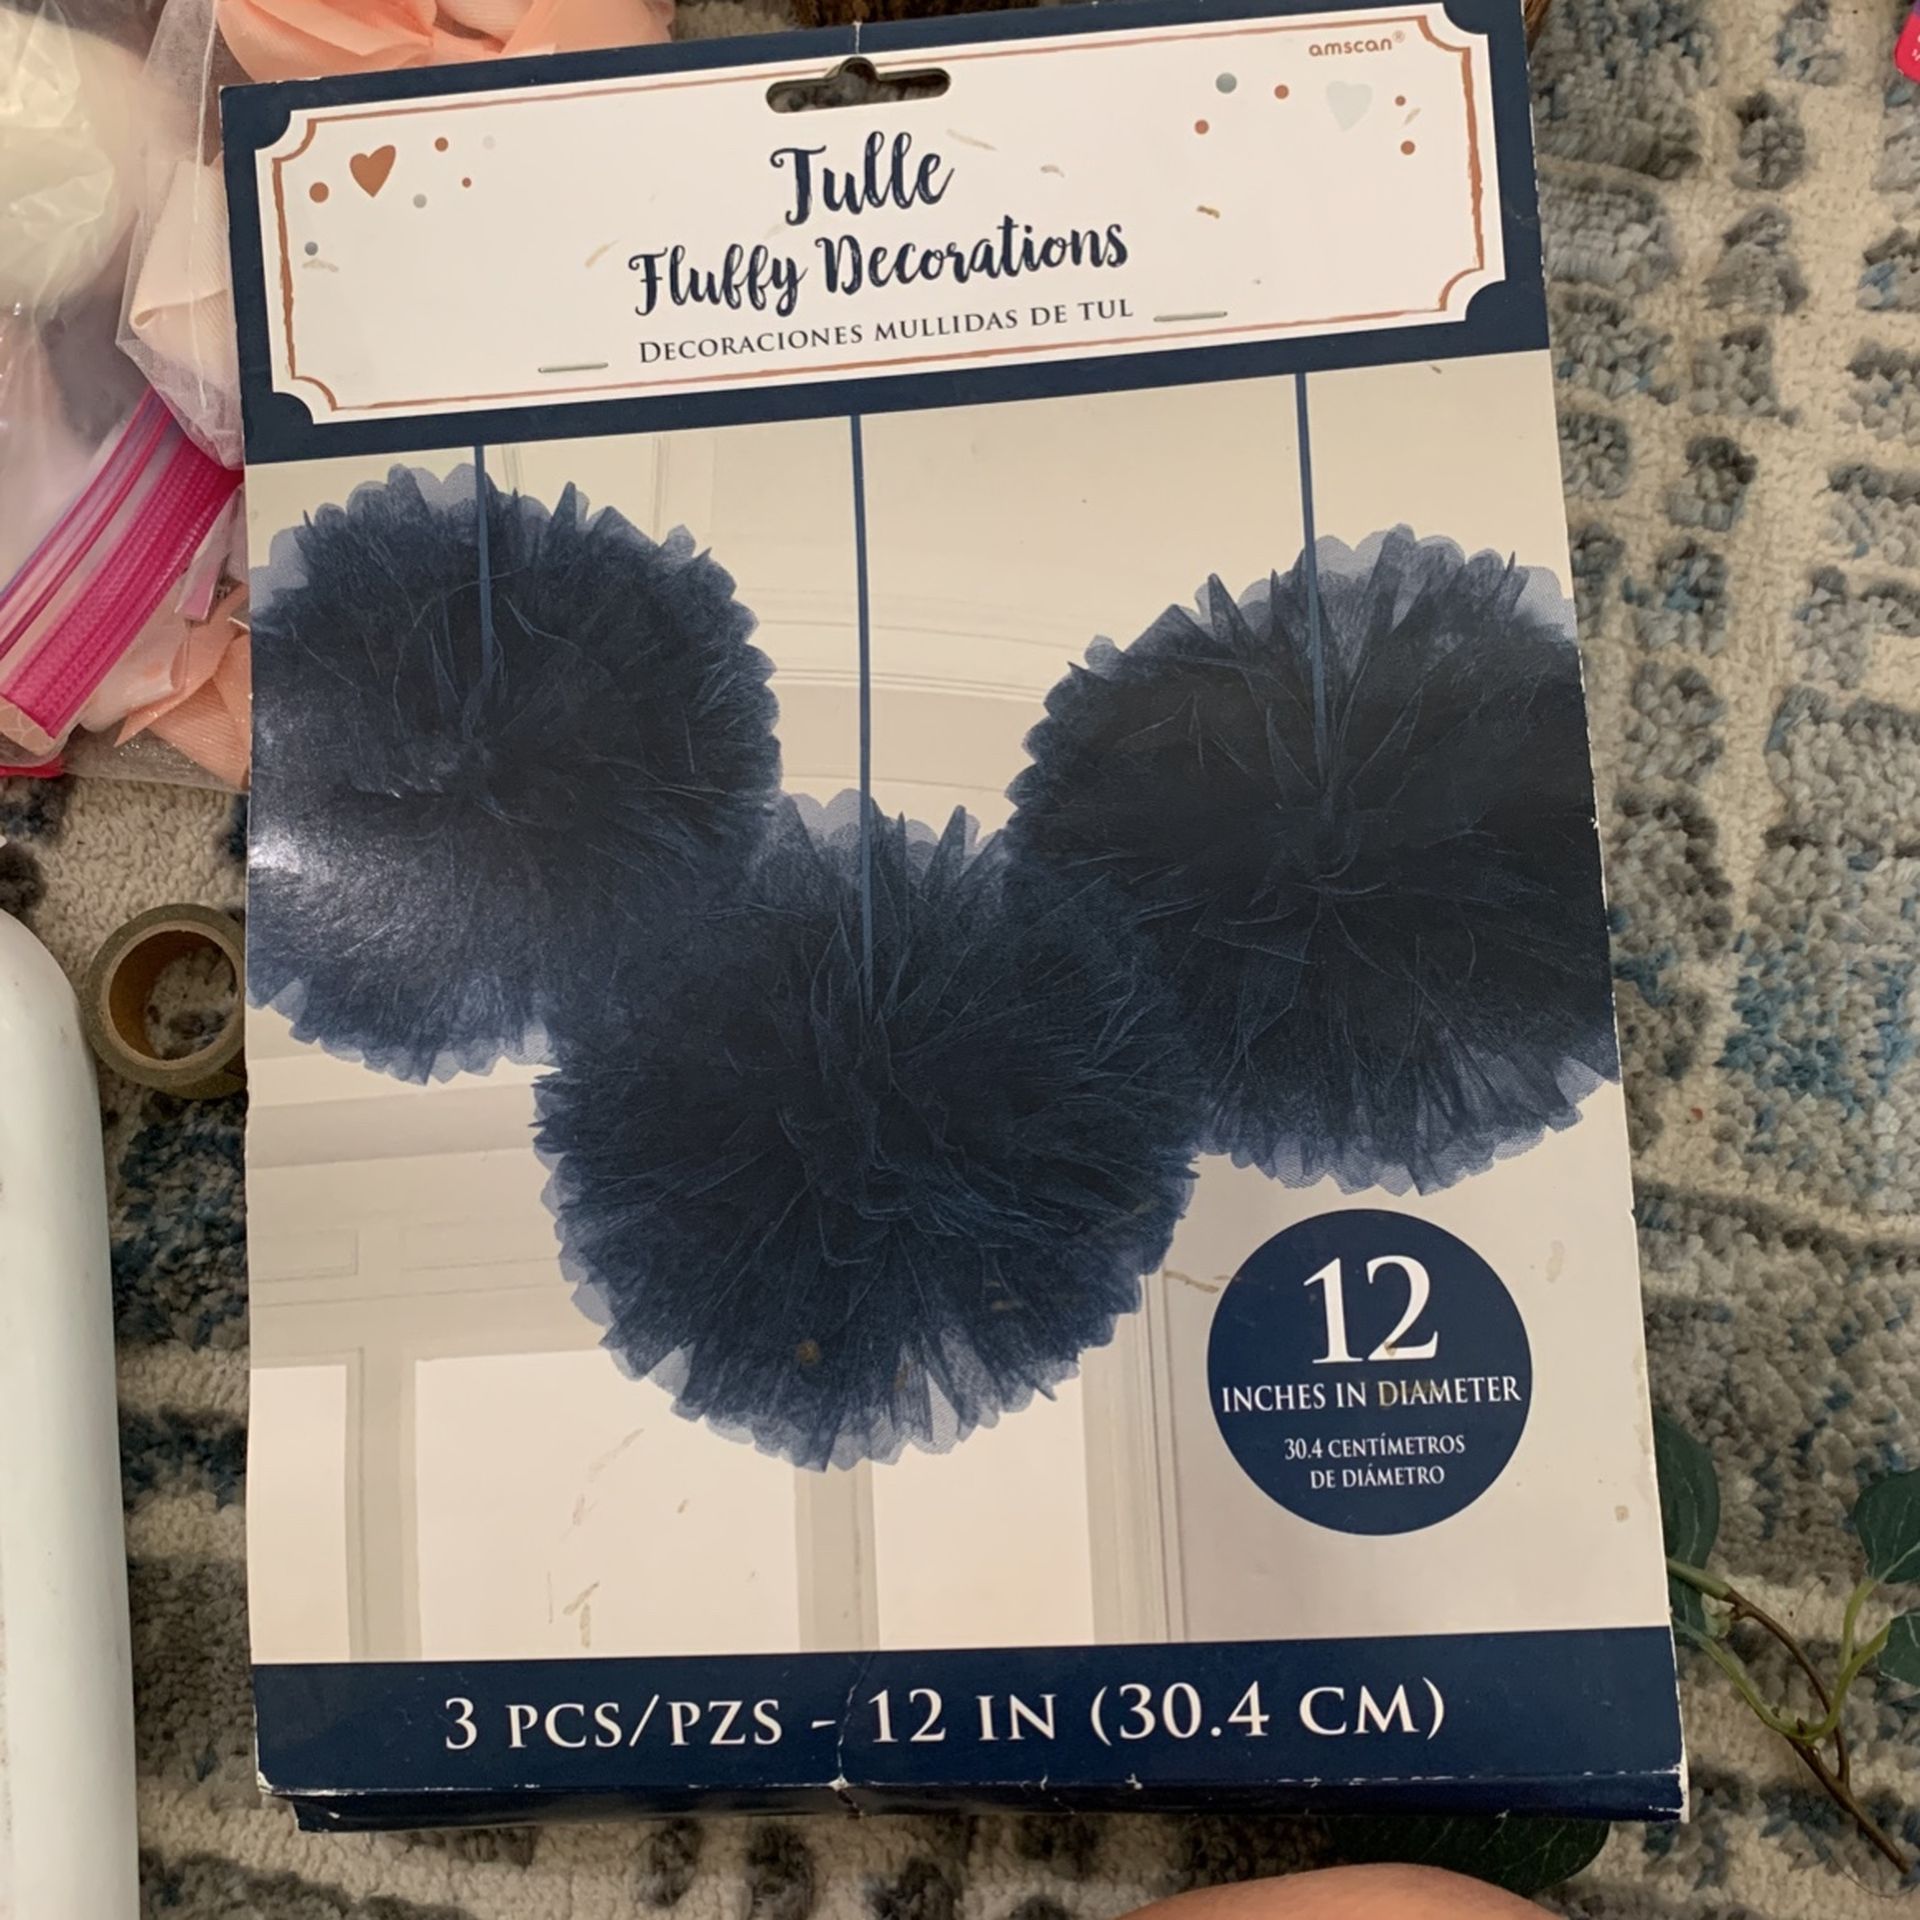 3 Fluffy Tulle Decorations New 